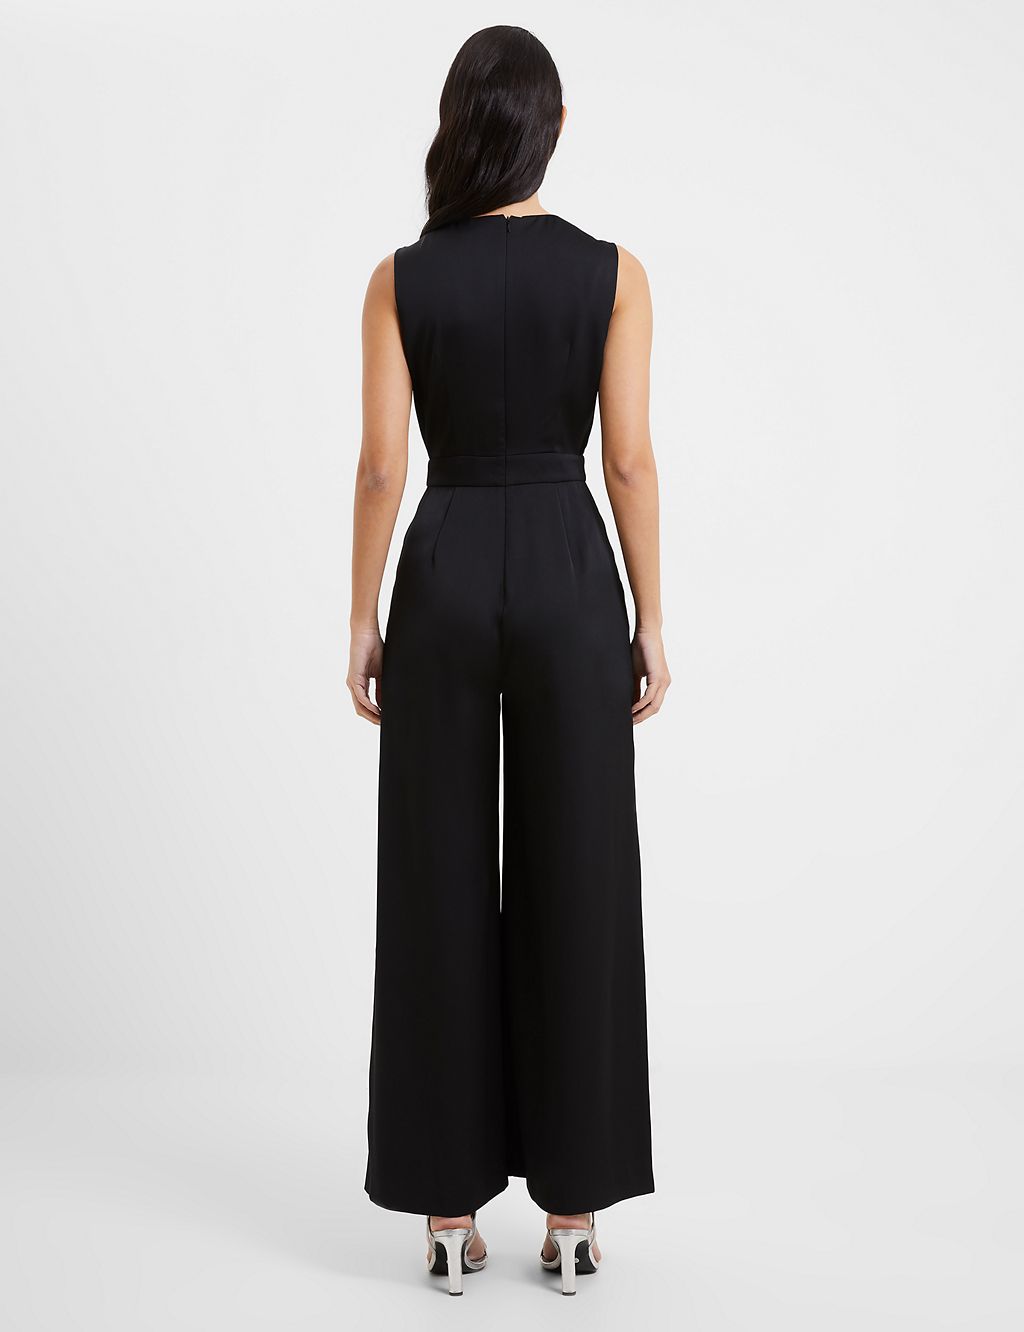 Satin Sleeveless Wide Leg Jumpsuit | French Connection | M&S